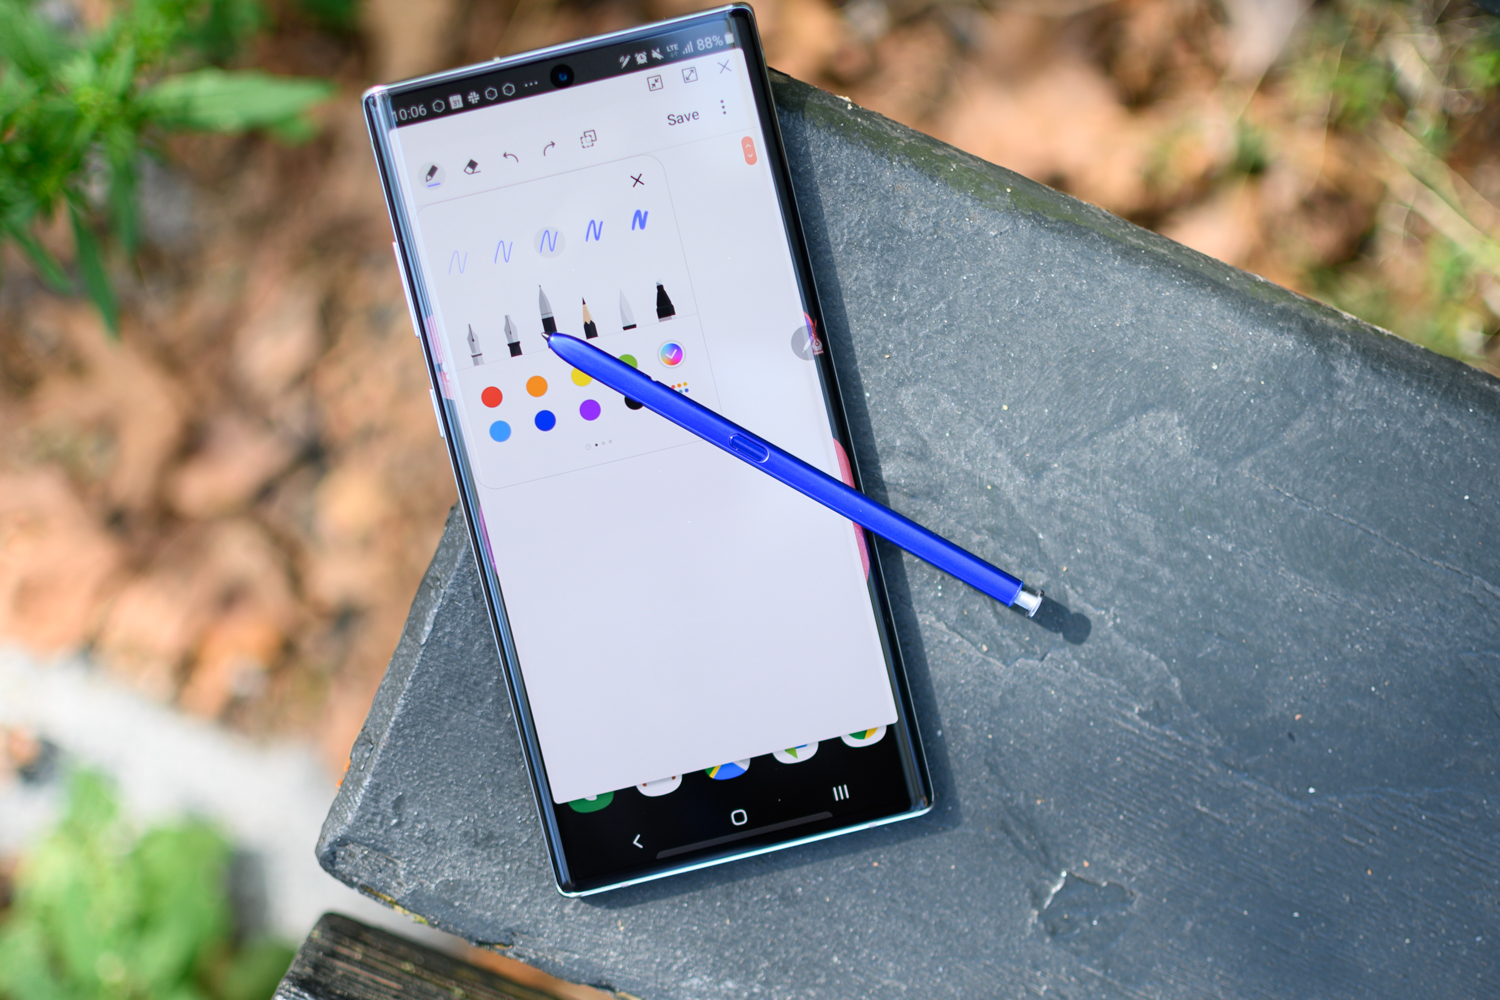 Samsung Galaxy Note 10 review: an enchanting smartphone for phablet fans